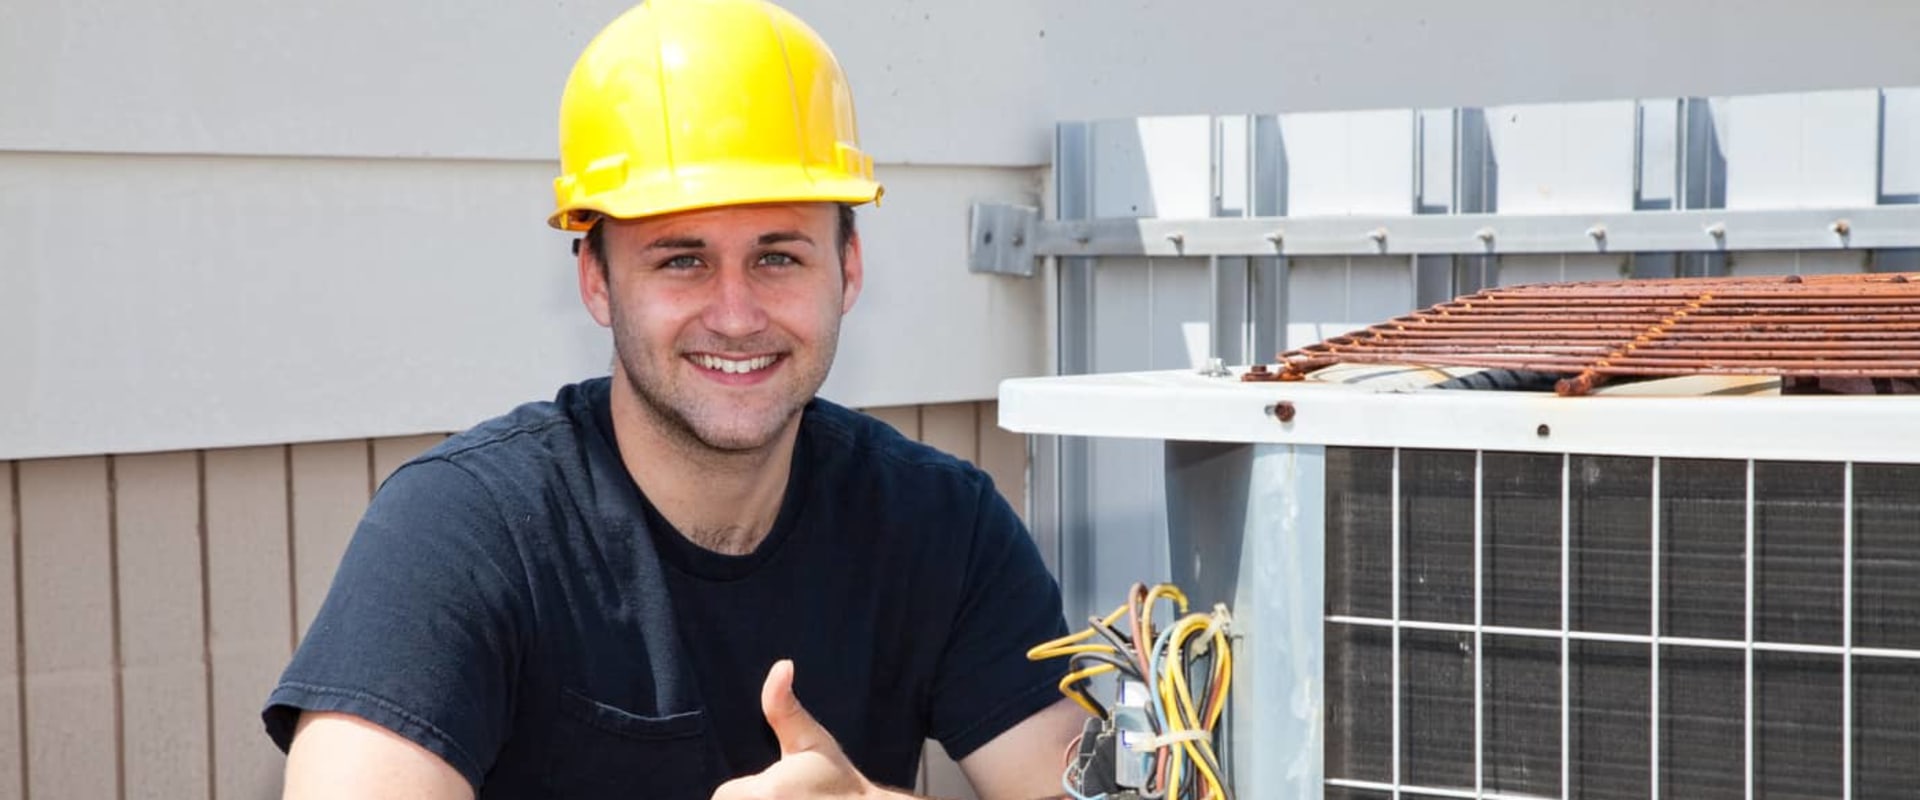 What regular maintenance does an hvac system require and how often should it be serviced?